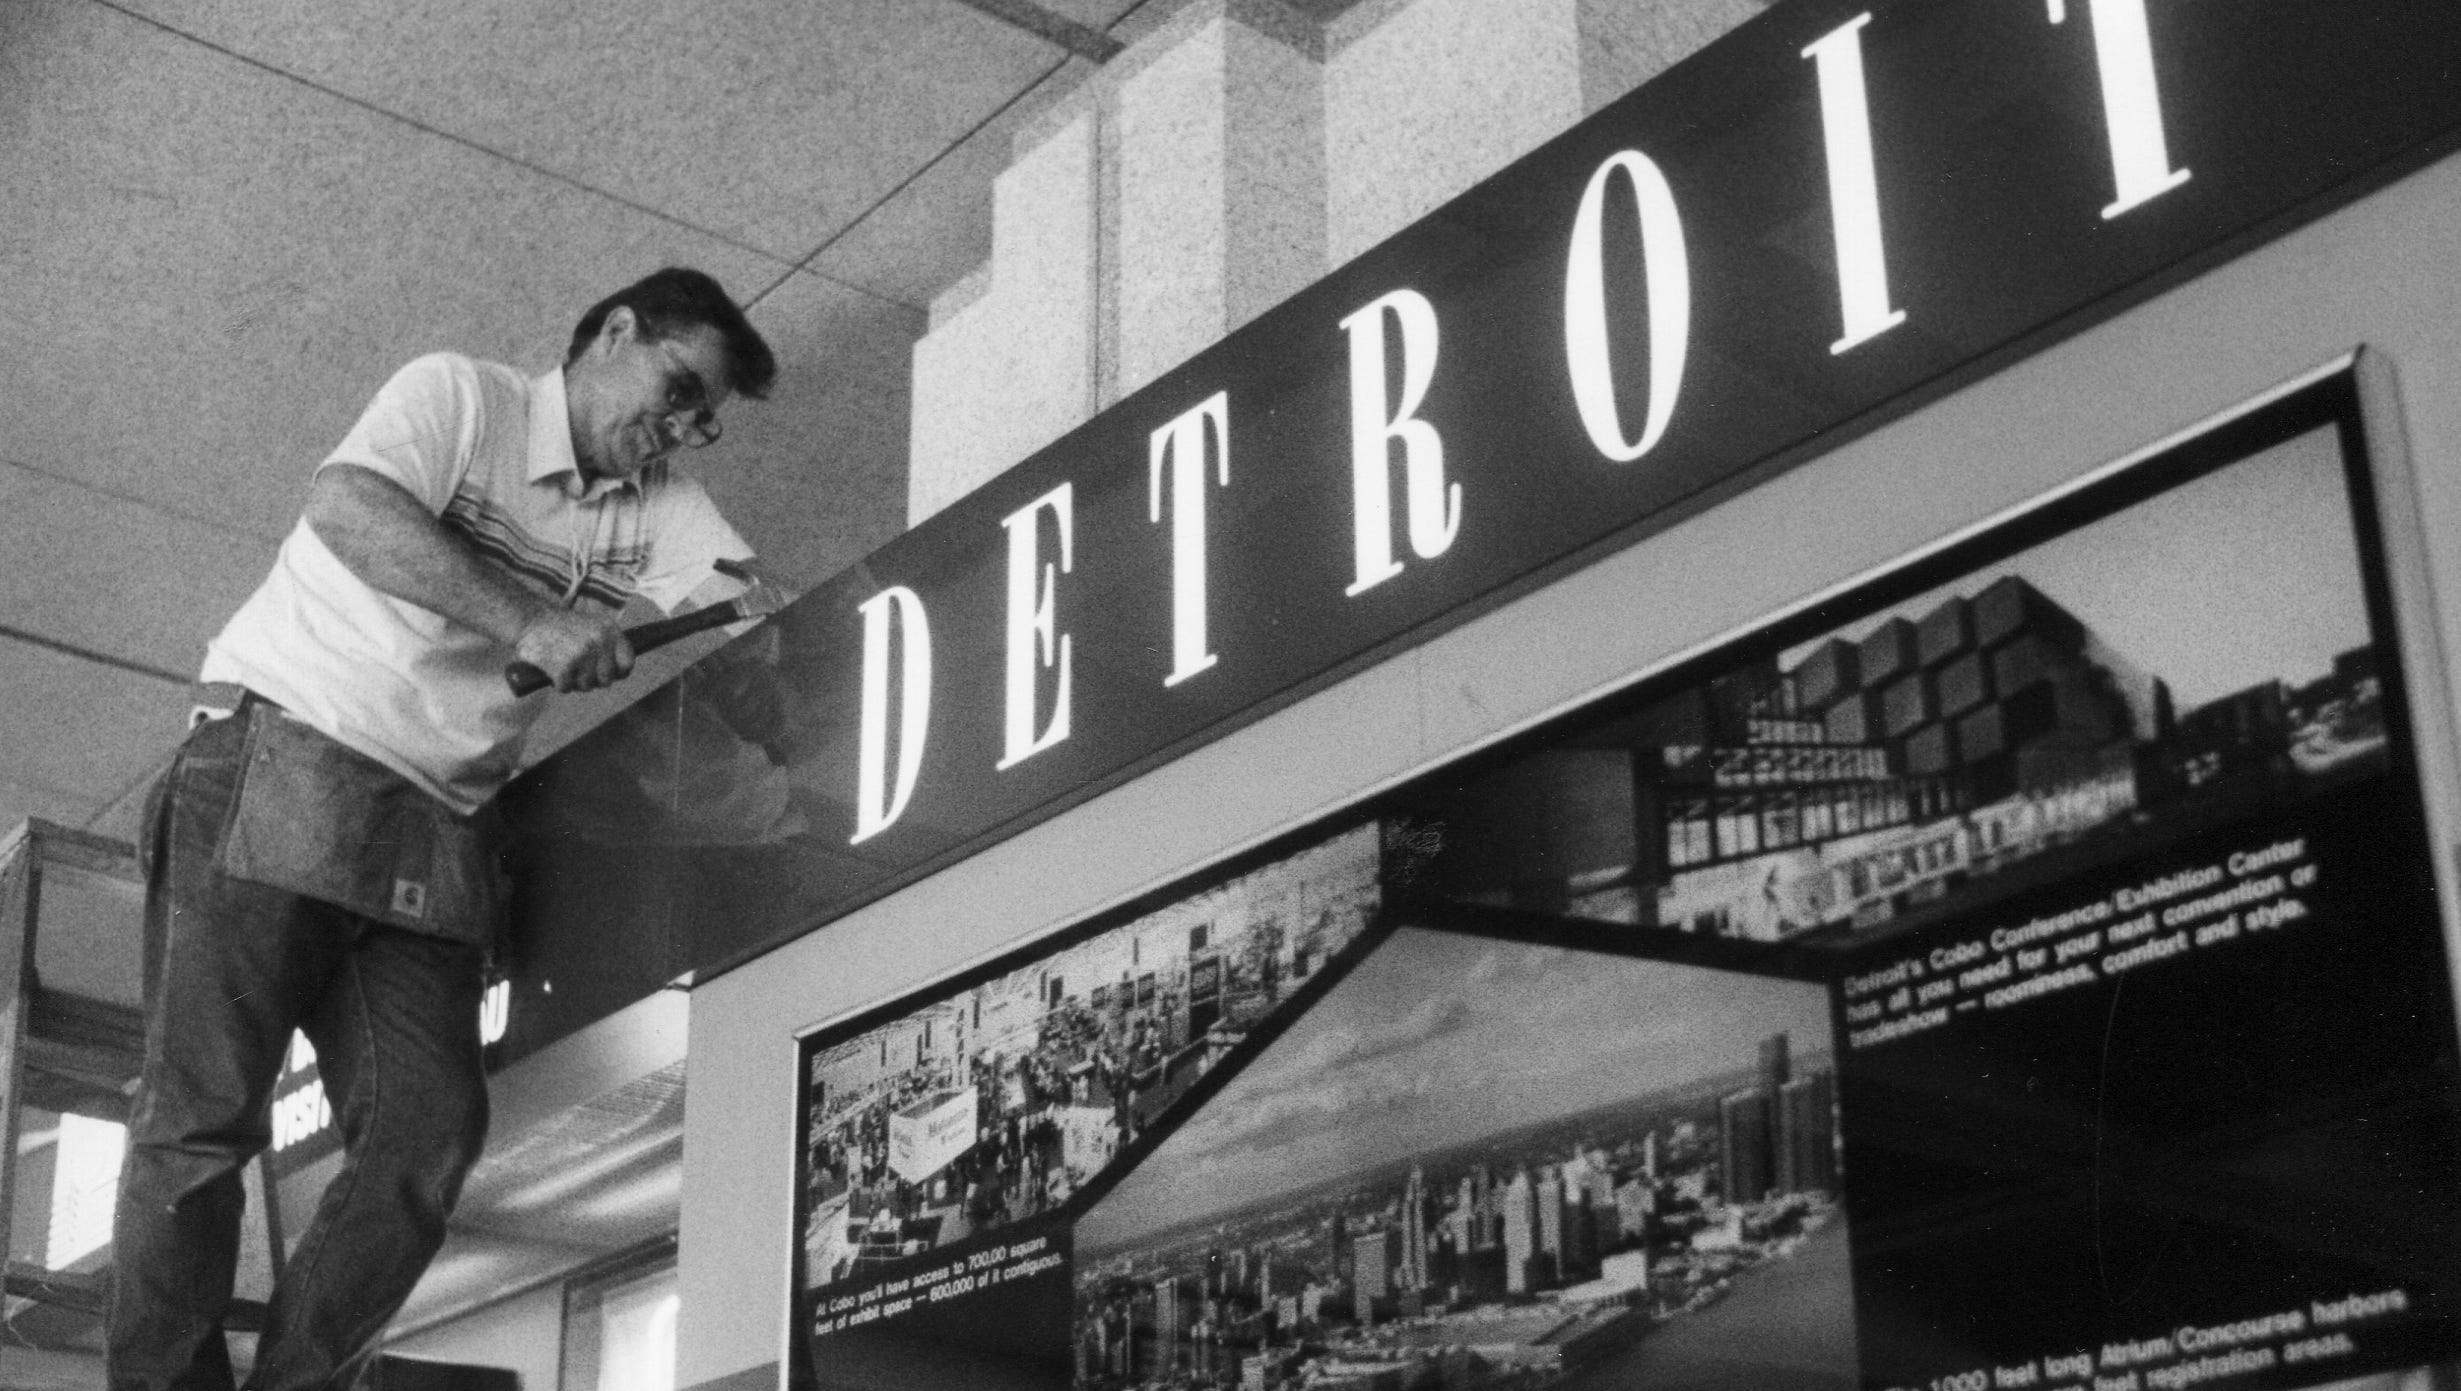 A worker puts finishing touches on a sign in Cobo on June 29, 1992.